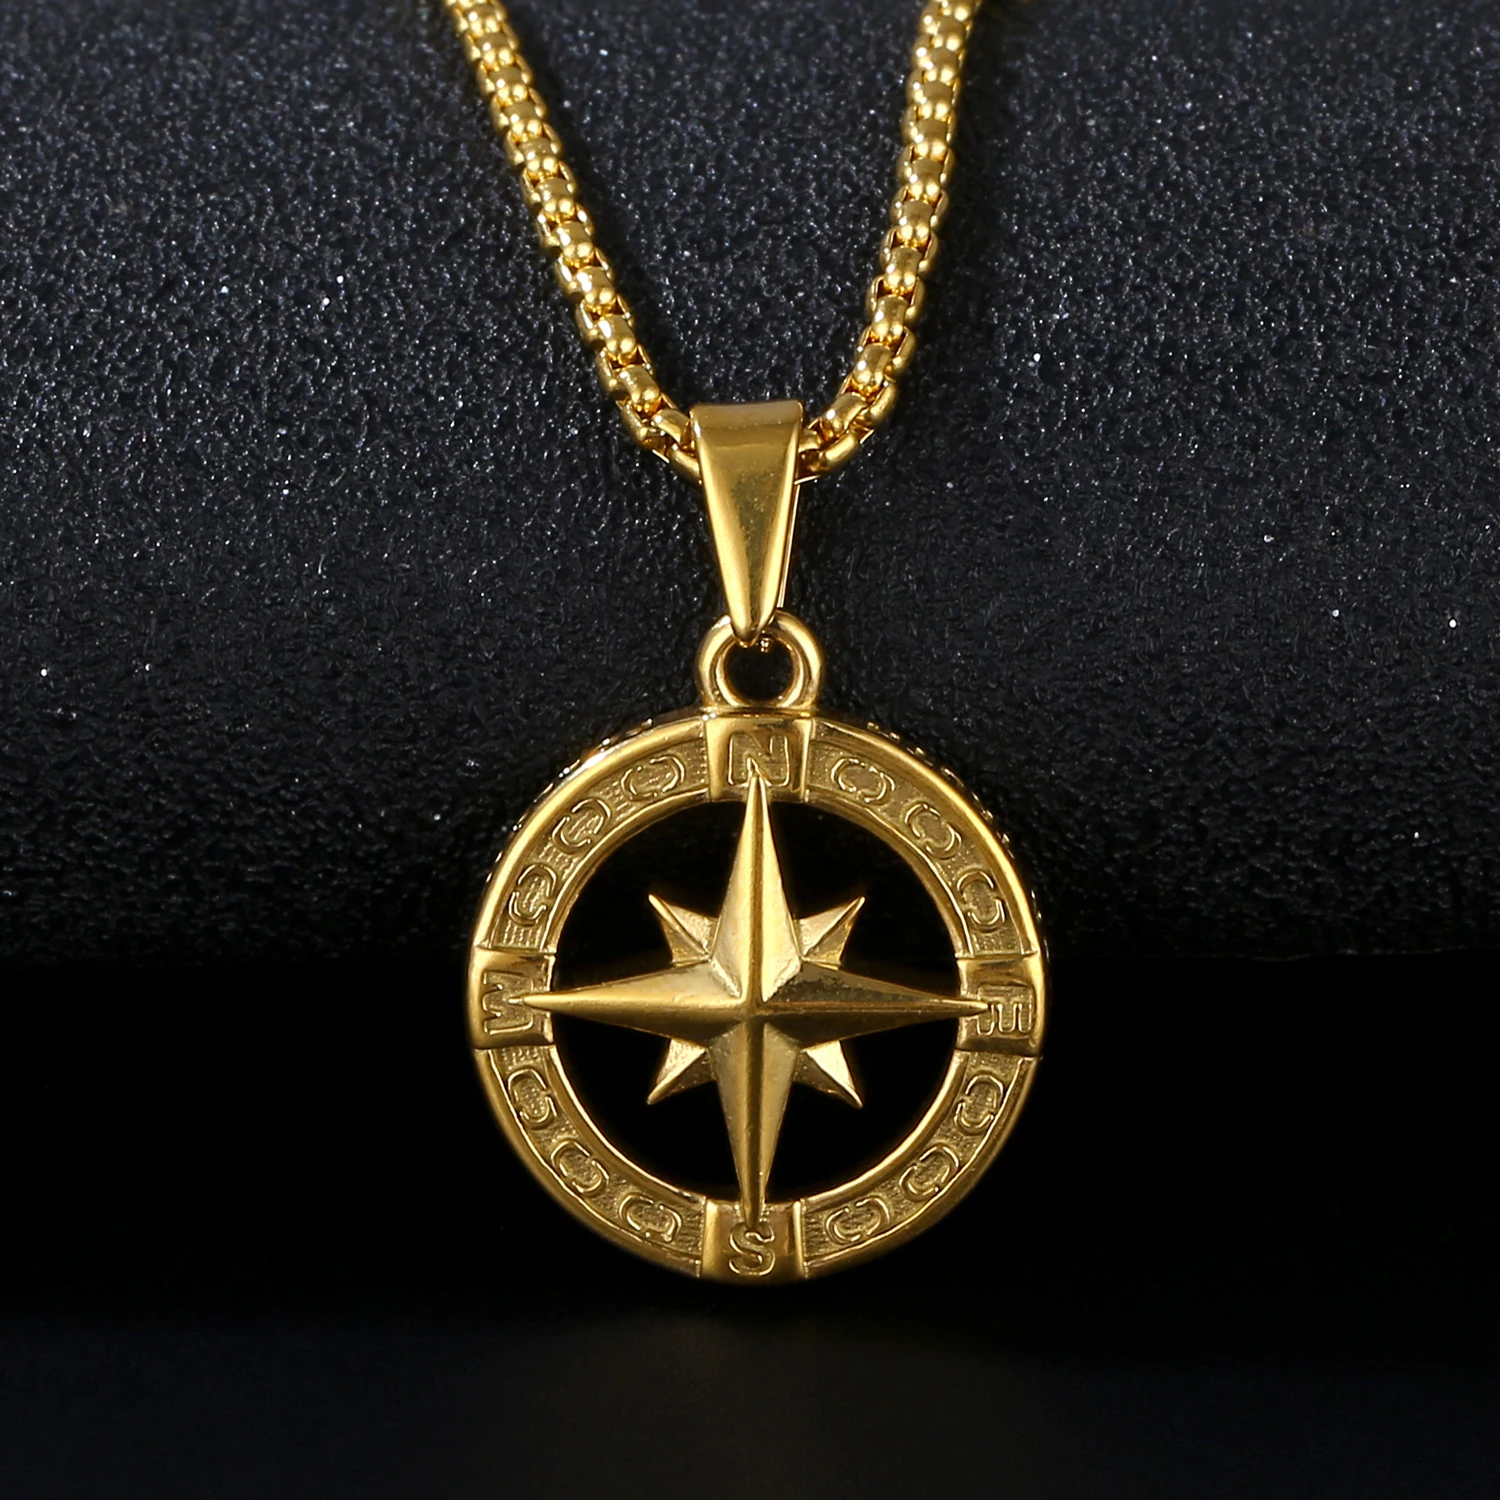 

18K Gold Stainless Steel Compass Pendant Waterproof Travel Jewelry Hiphop North Star Pendant Necklace for Women Men